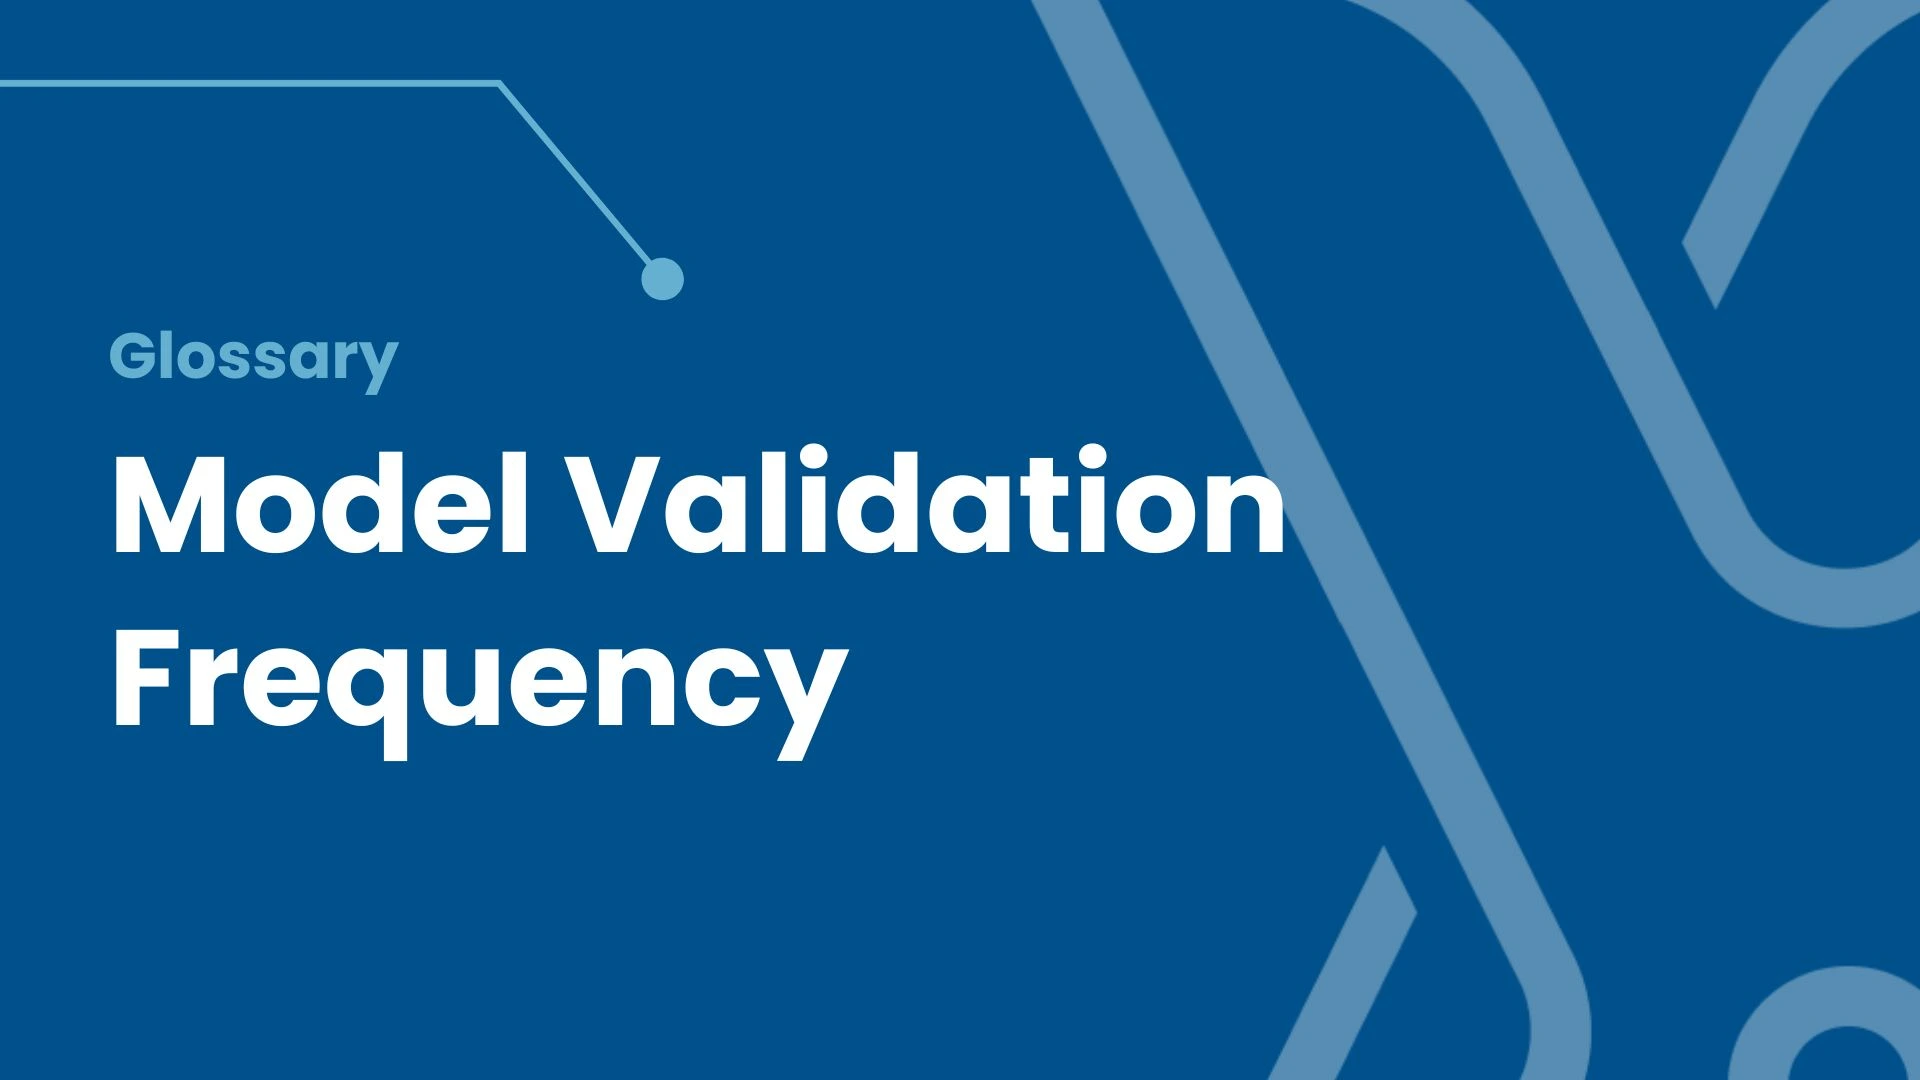 What is Model Validation Frequency?